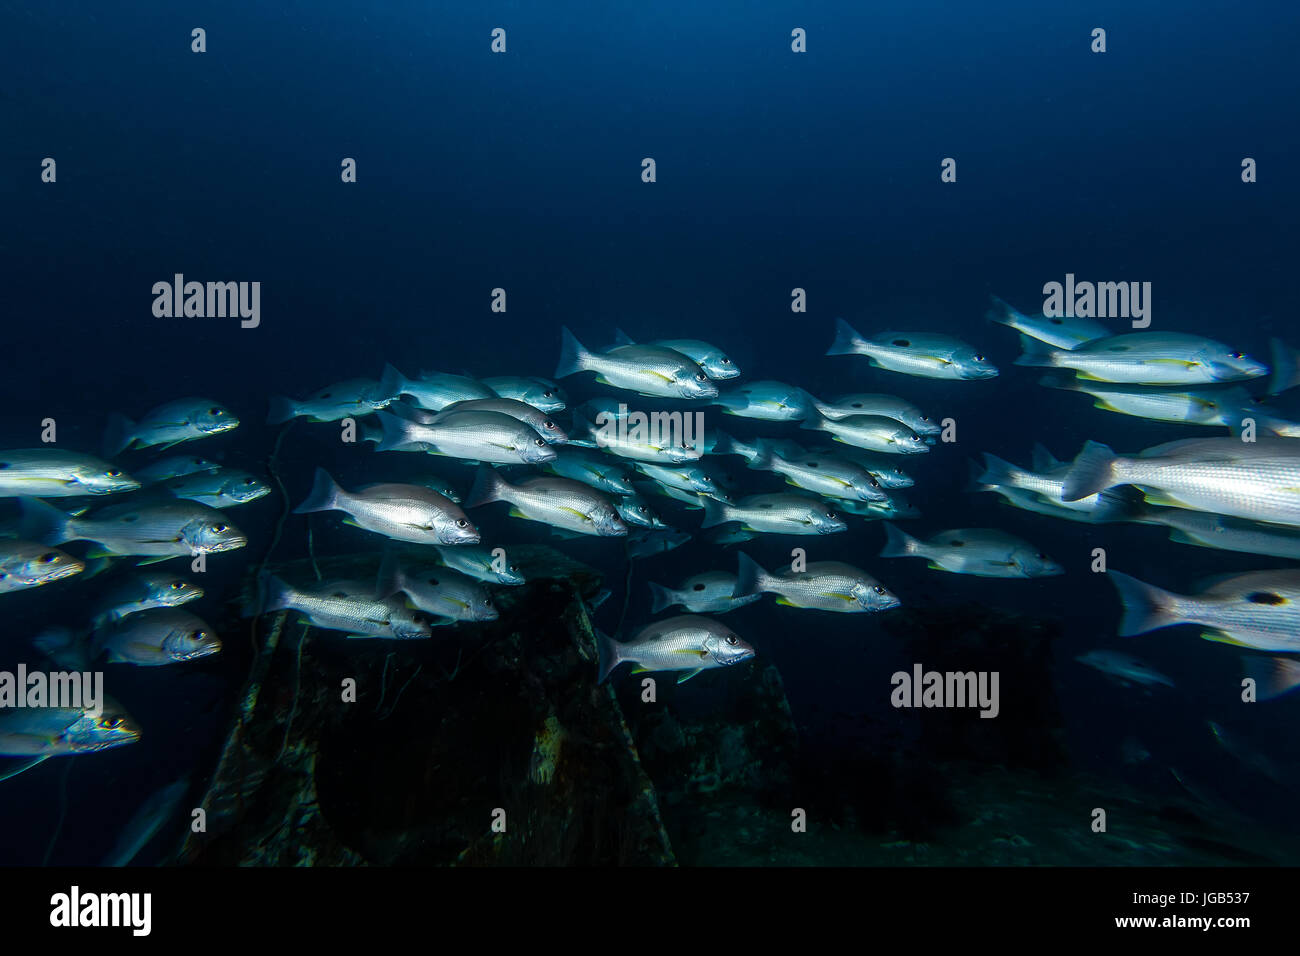 School of Russell's snapper (Lutjanus russellii) fish in the blue sea Stock Photo